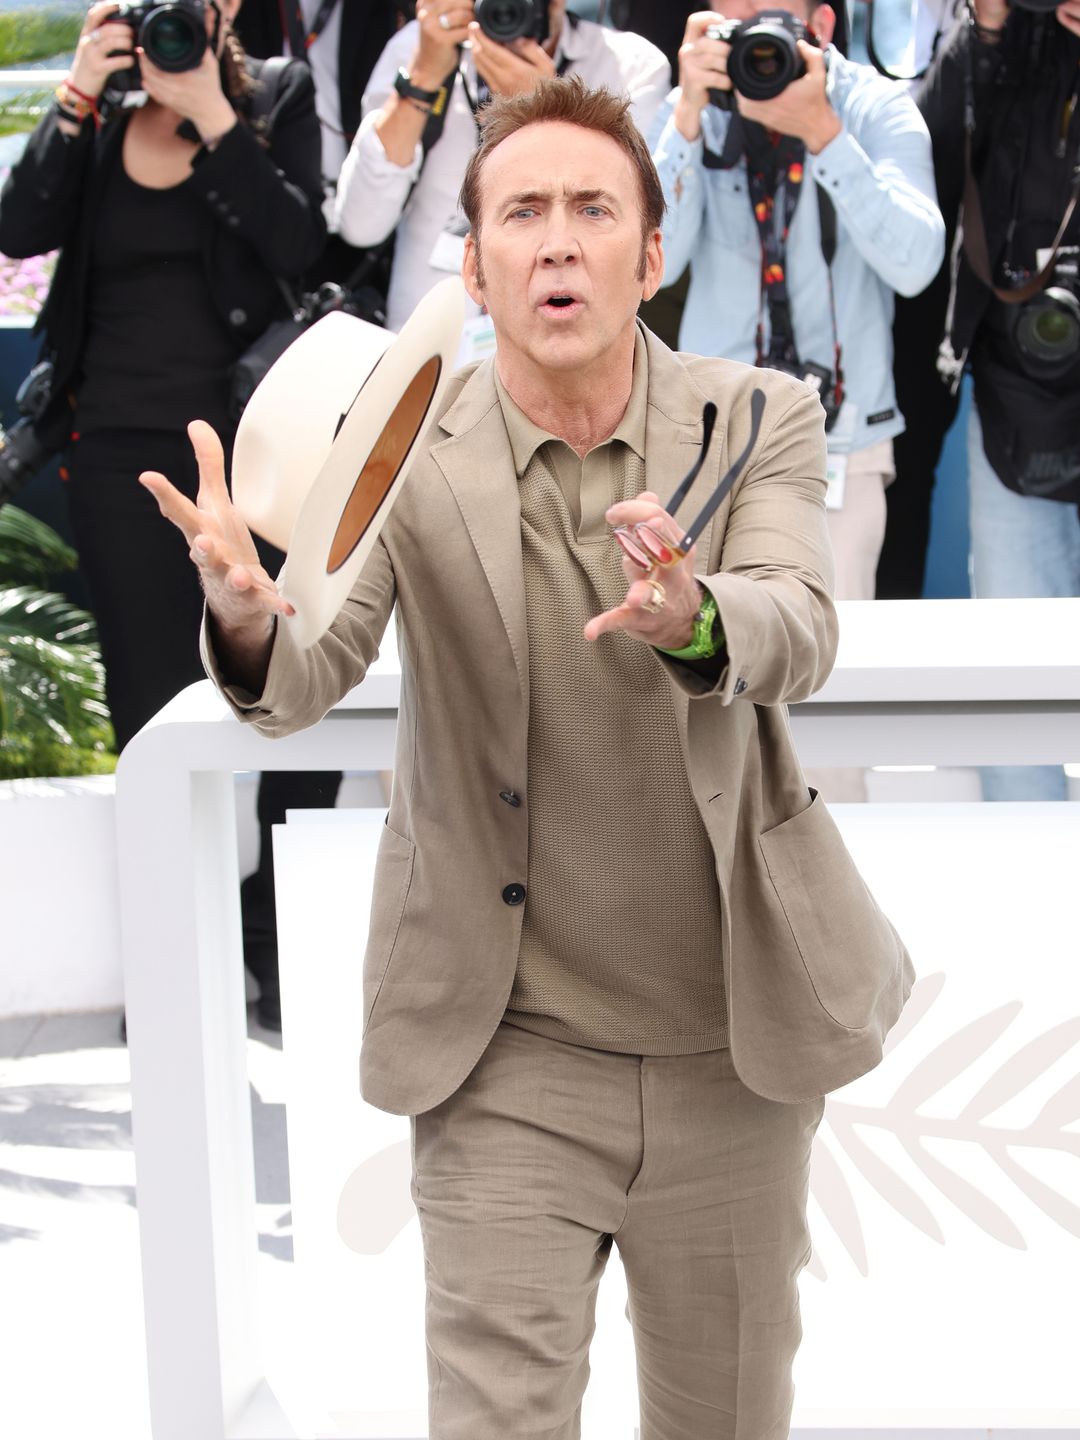 Nicolas Cage in a beige outfit trying to catch a hat